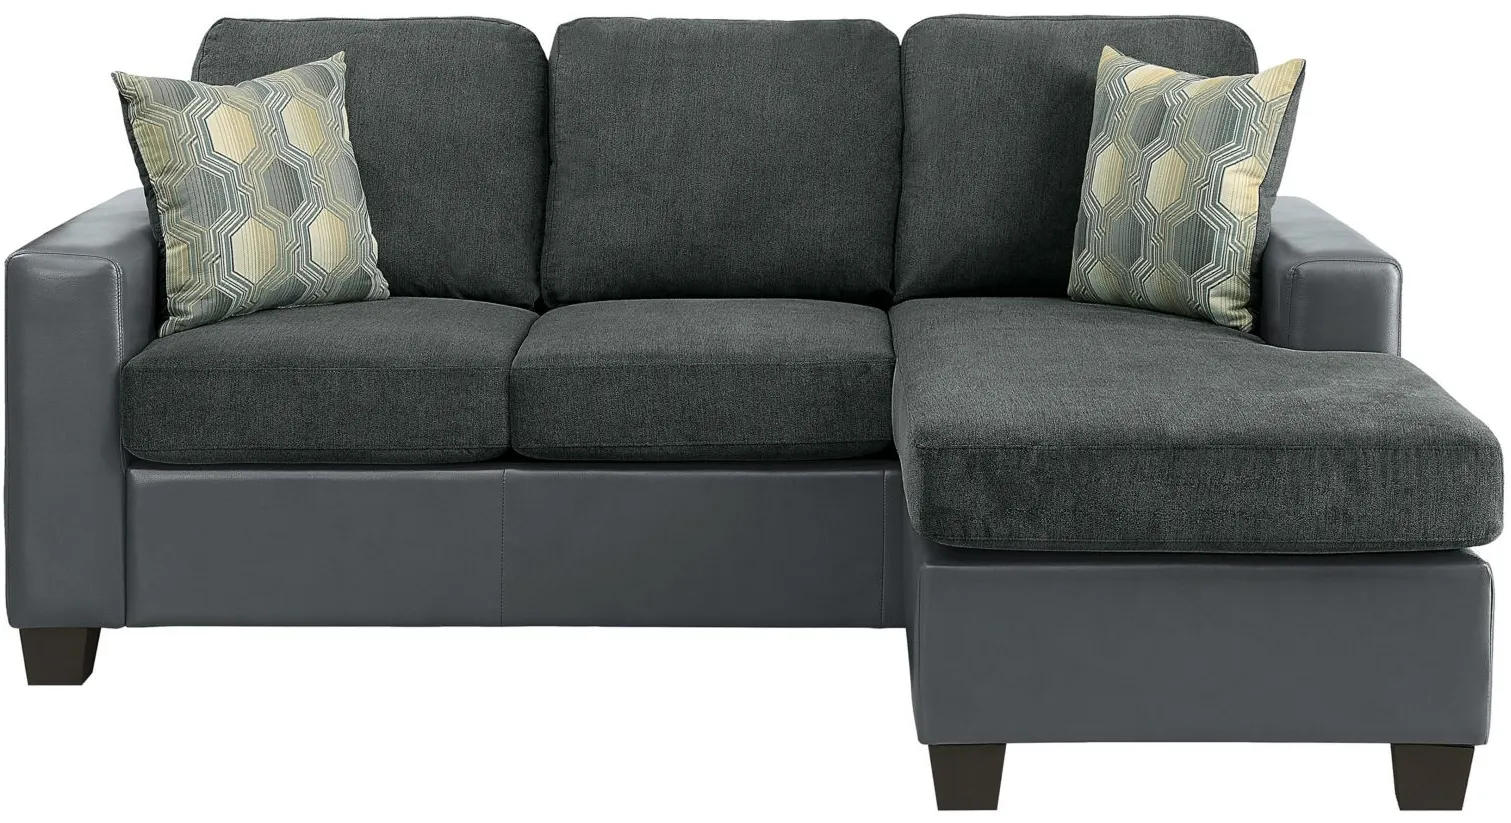 Erika 2-pc. Left Arm Facing Reversible Sectional Sofa in Gray by Homelegance